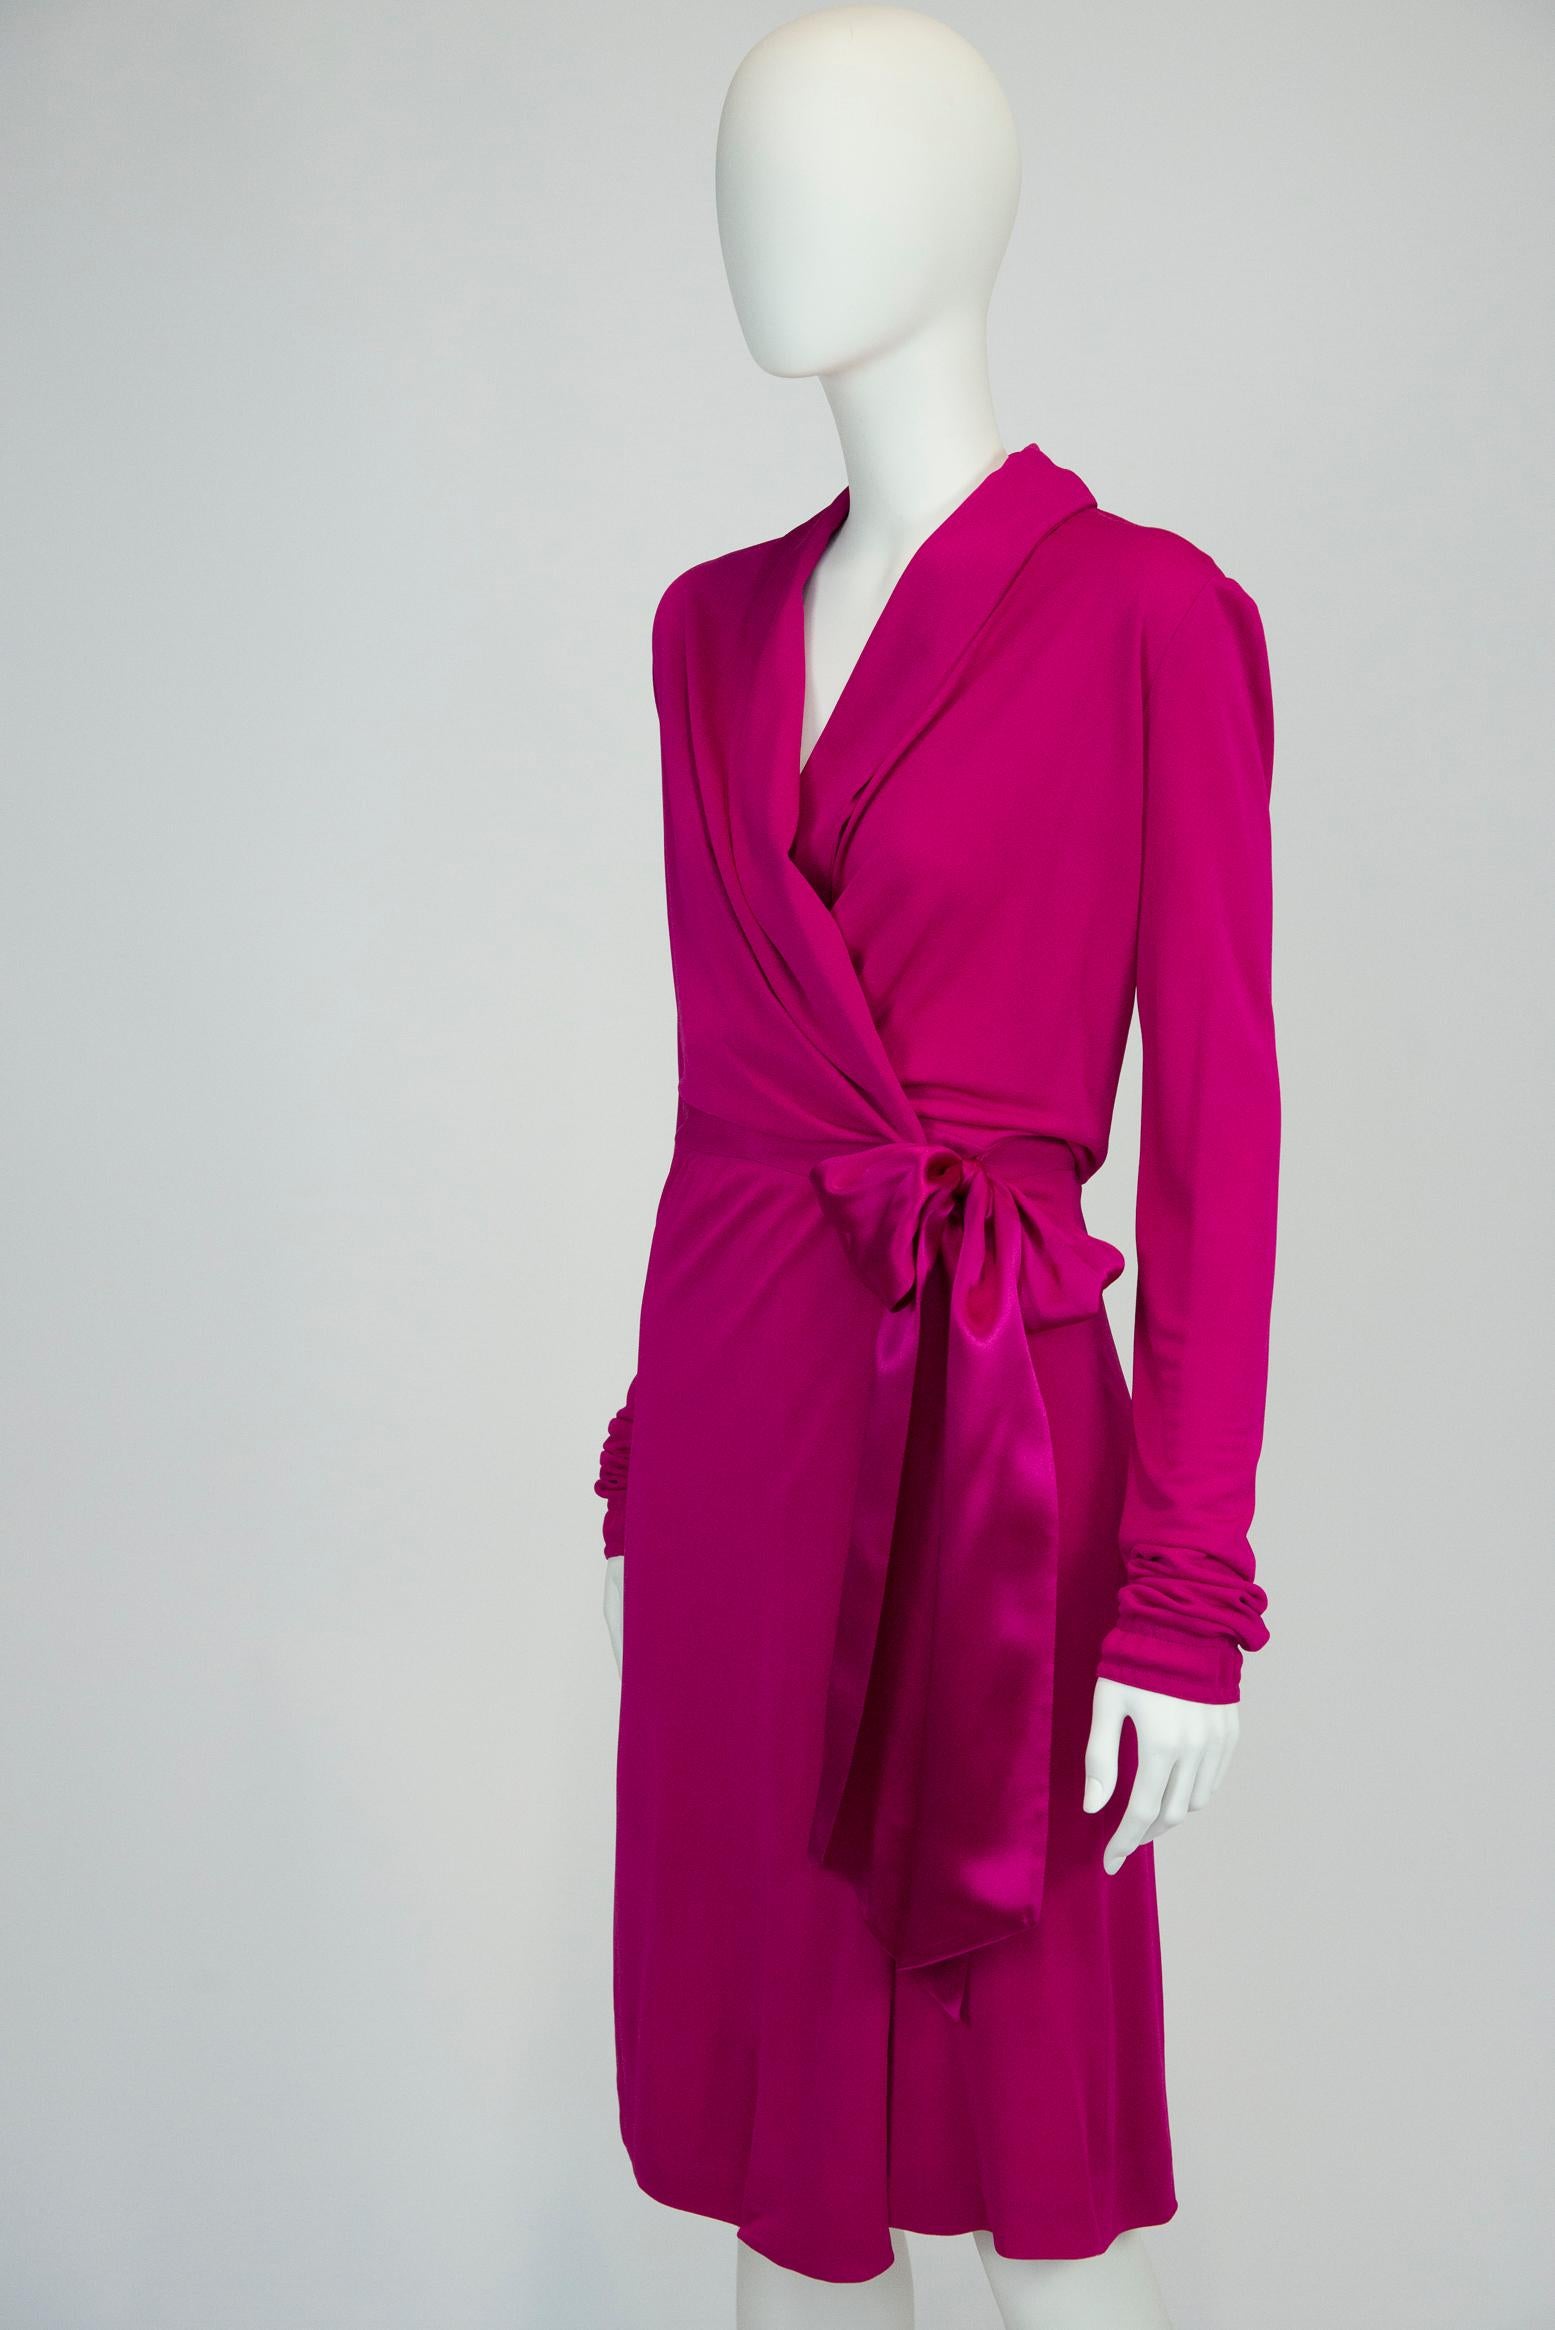 Yves Saint Laurent By Tom Ford Wrap Dress For Sale 1